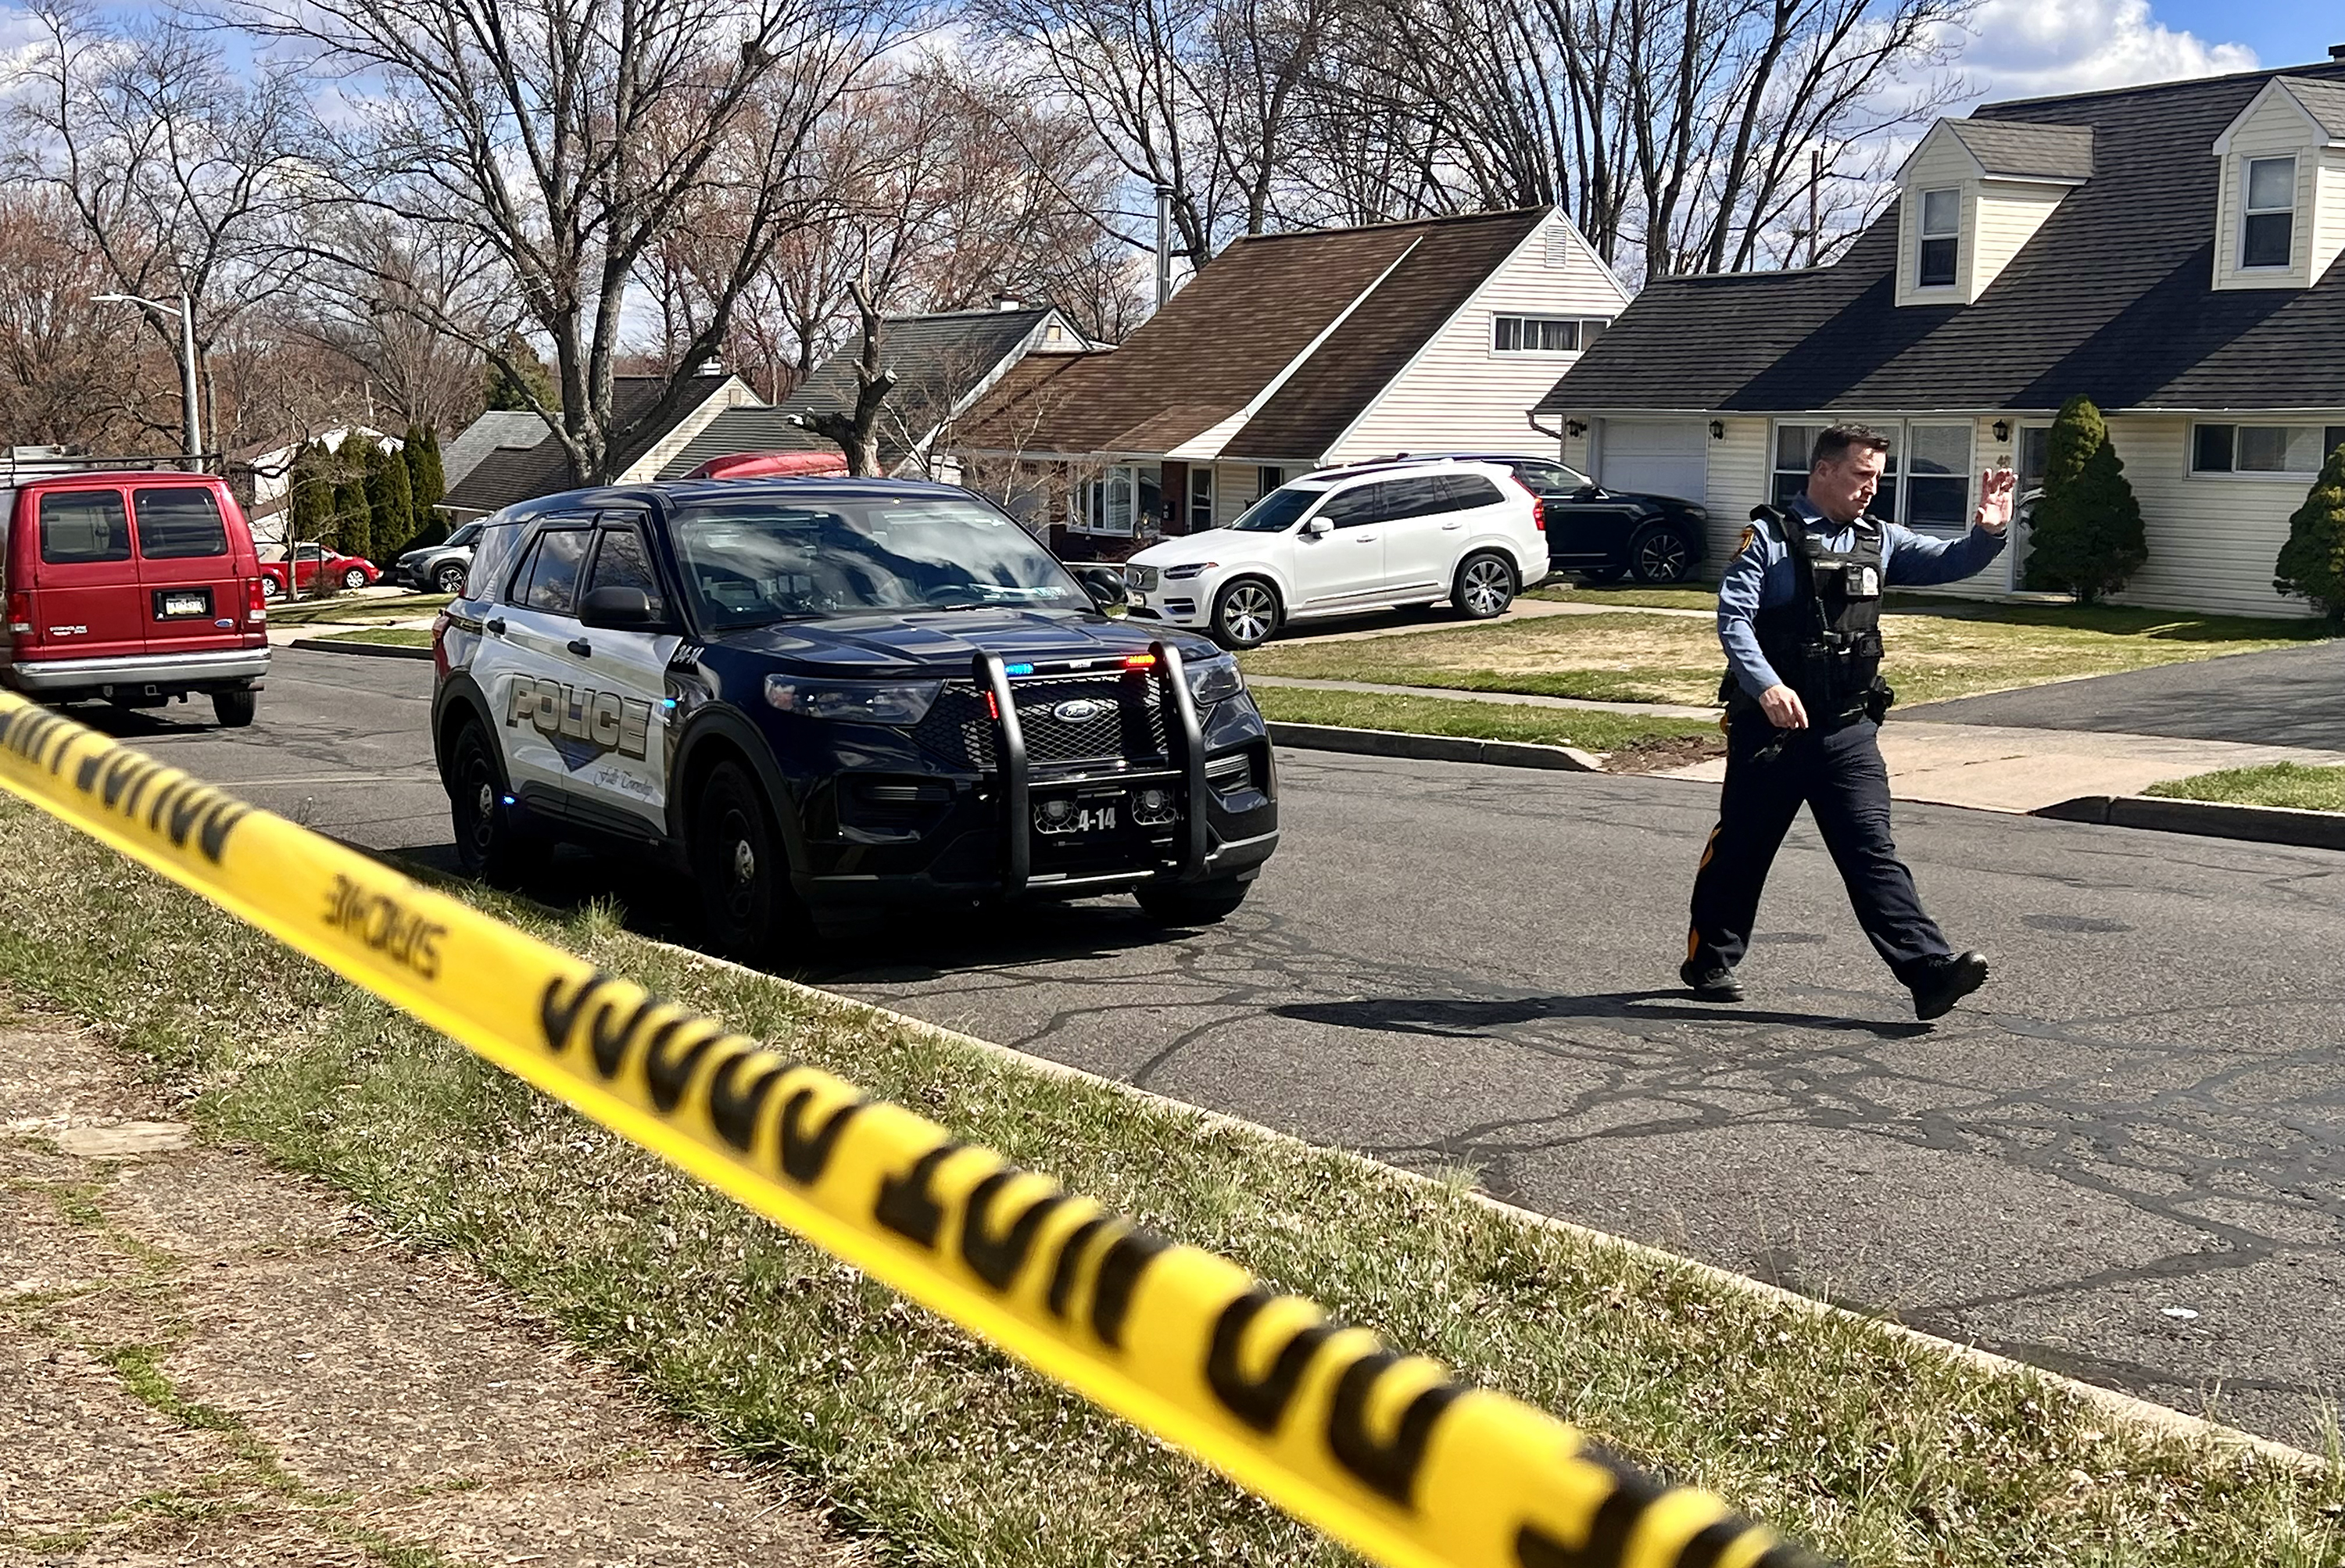 A police officer patrols a neighborhood during an active shooter situation in Levittown, a community within Falls Township, Pennsylvania, where a a shelter-in-place order was issued on March 16.